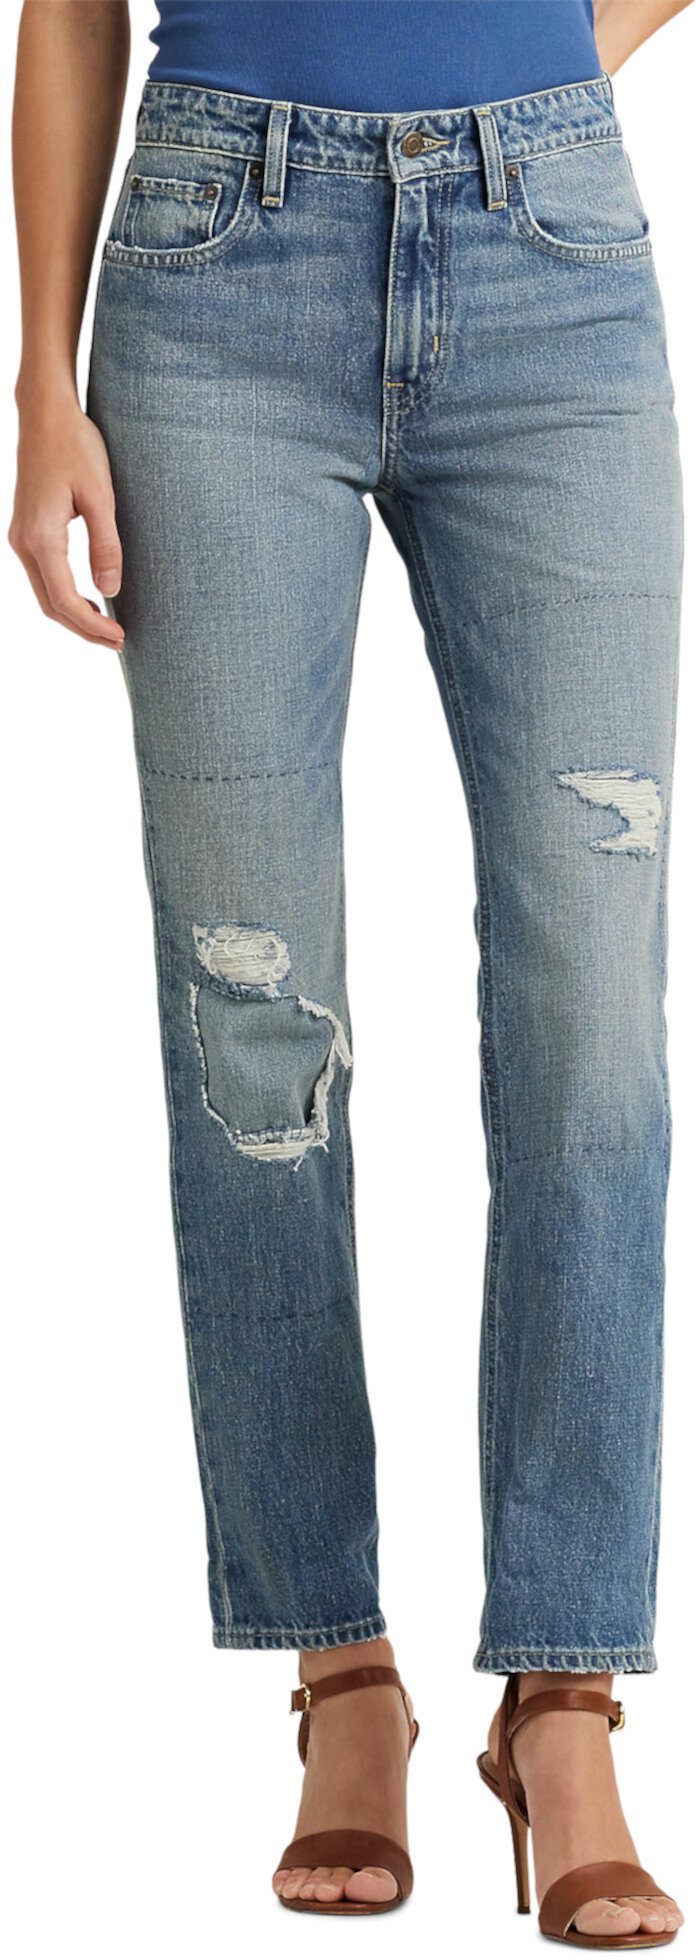 Distressed High-Rise Straight Ankle Jeans in Cassis Wash LAUREN Ralph Lauren